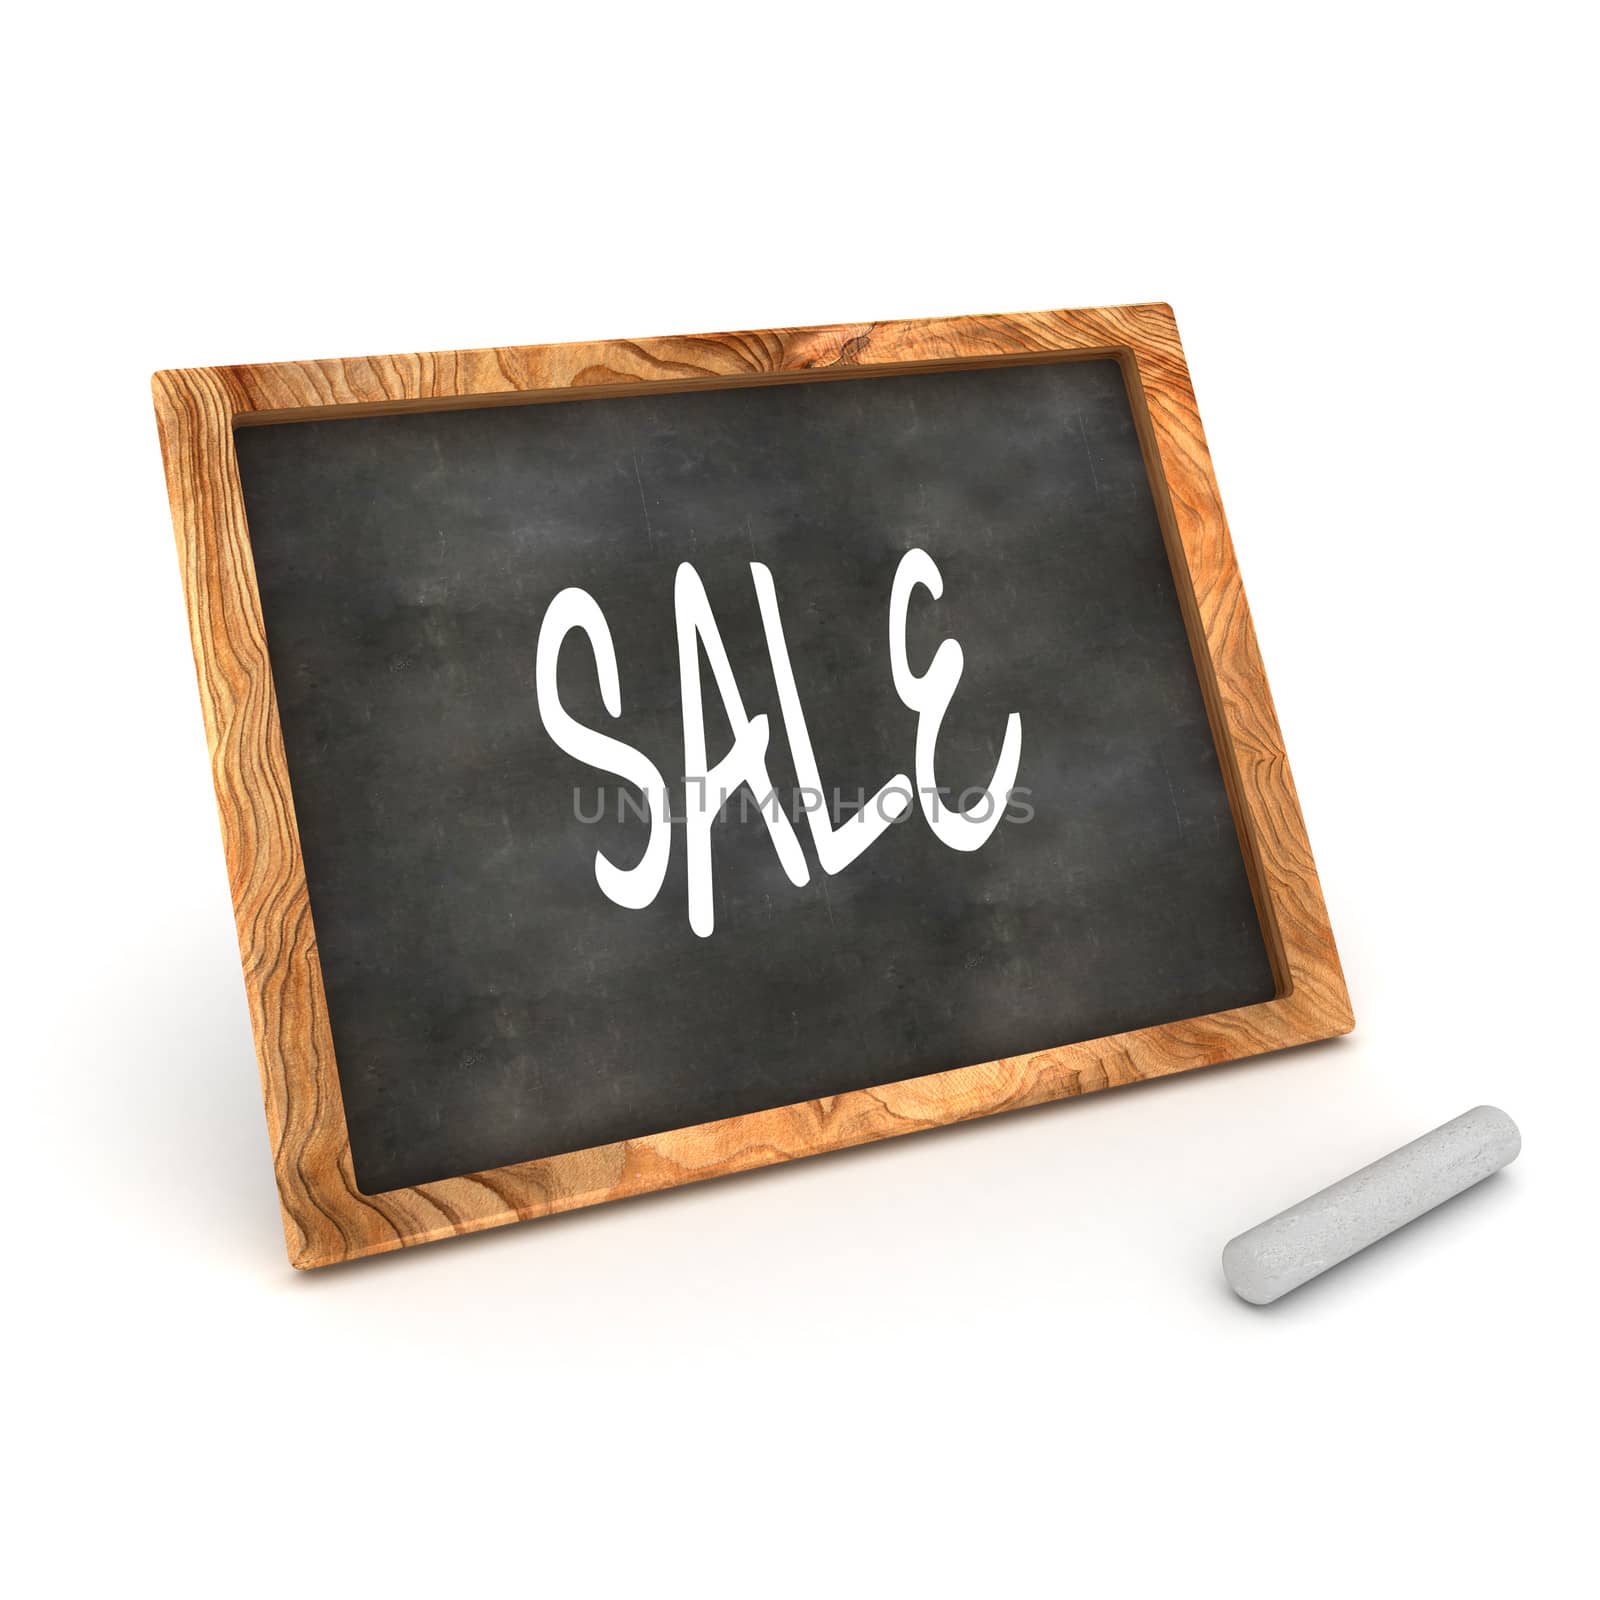 A Colourful 3d Rendered Concept Illustration showing "SALE" writen on a Blackboard with white chalk